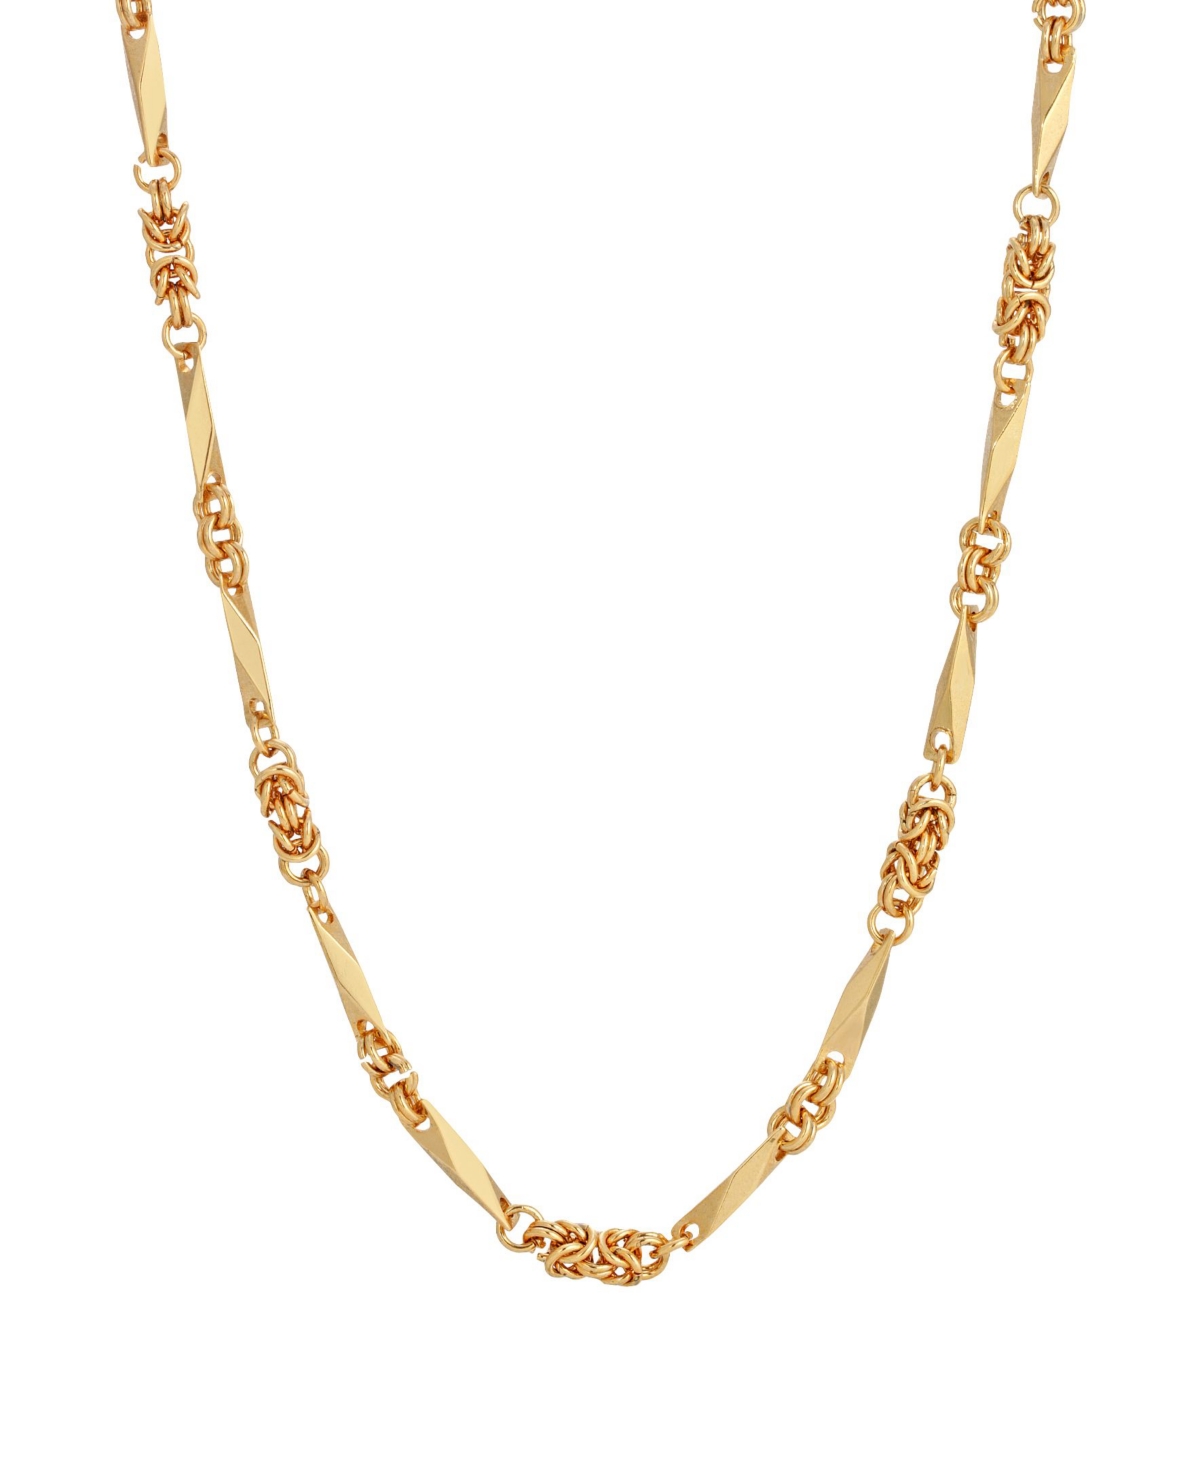 14K Gold Plated Link Knot Chain Necklace - Gold-Tone